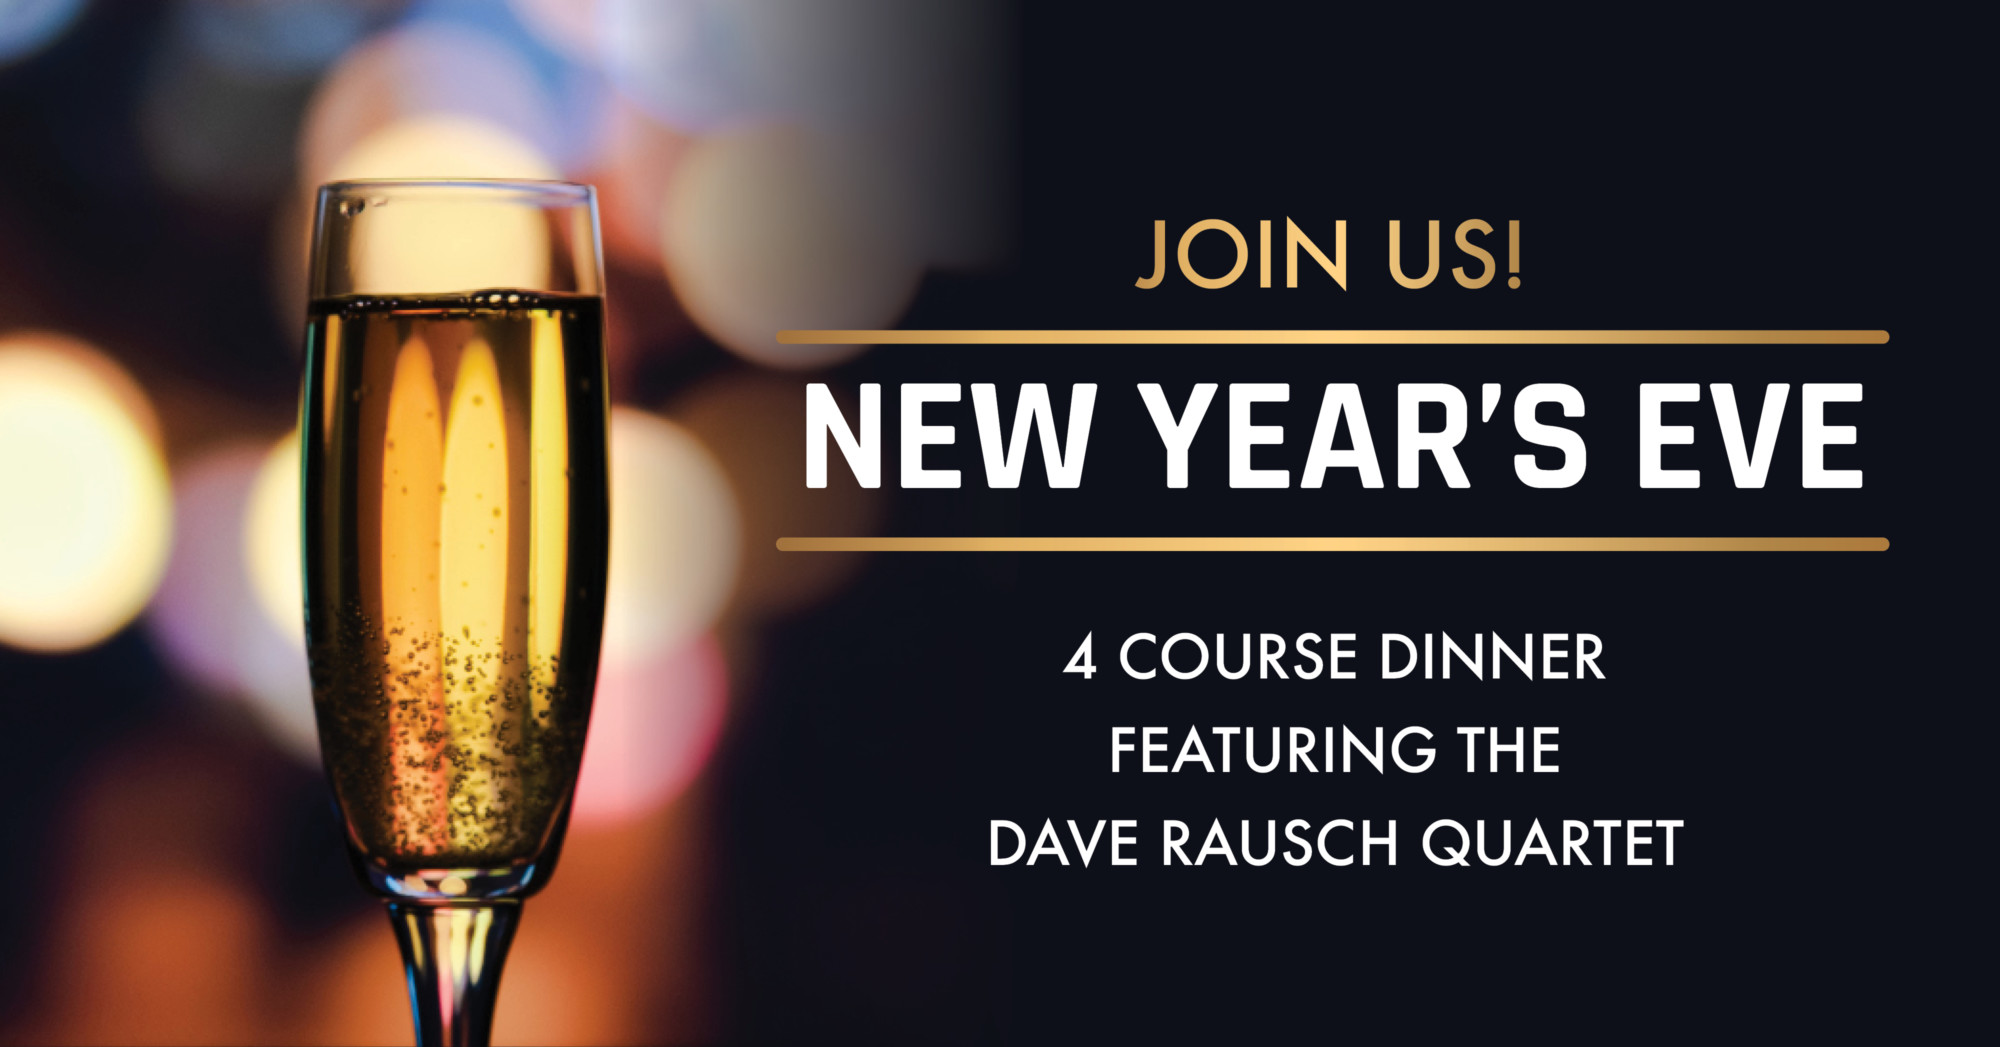 New Year's Eve at the Reef. 4 course dinner featuring the Dave Rausch Quartet